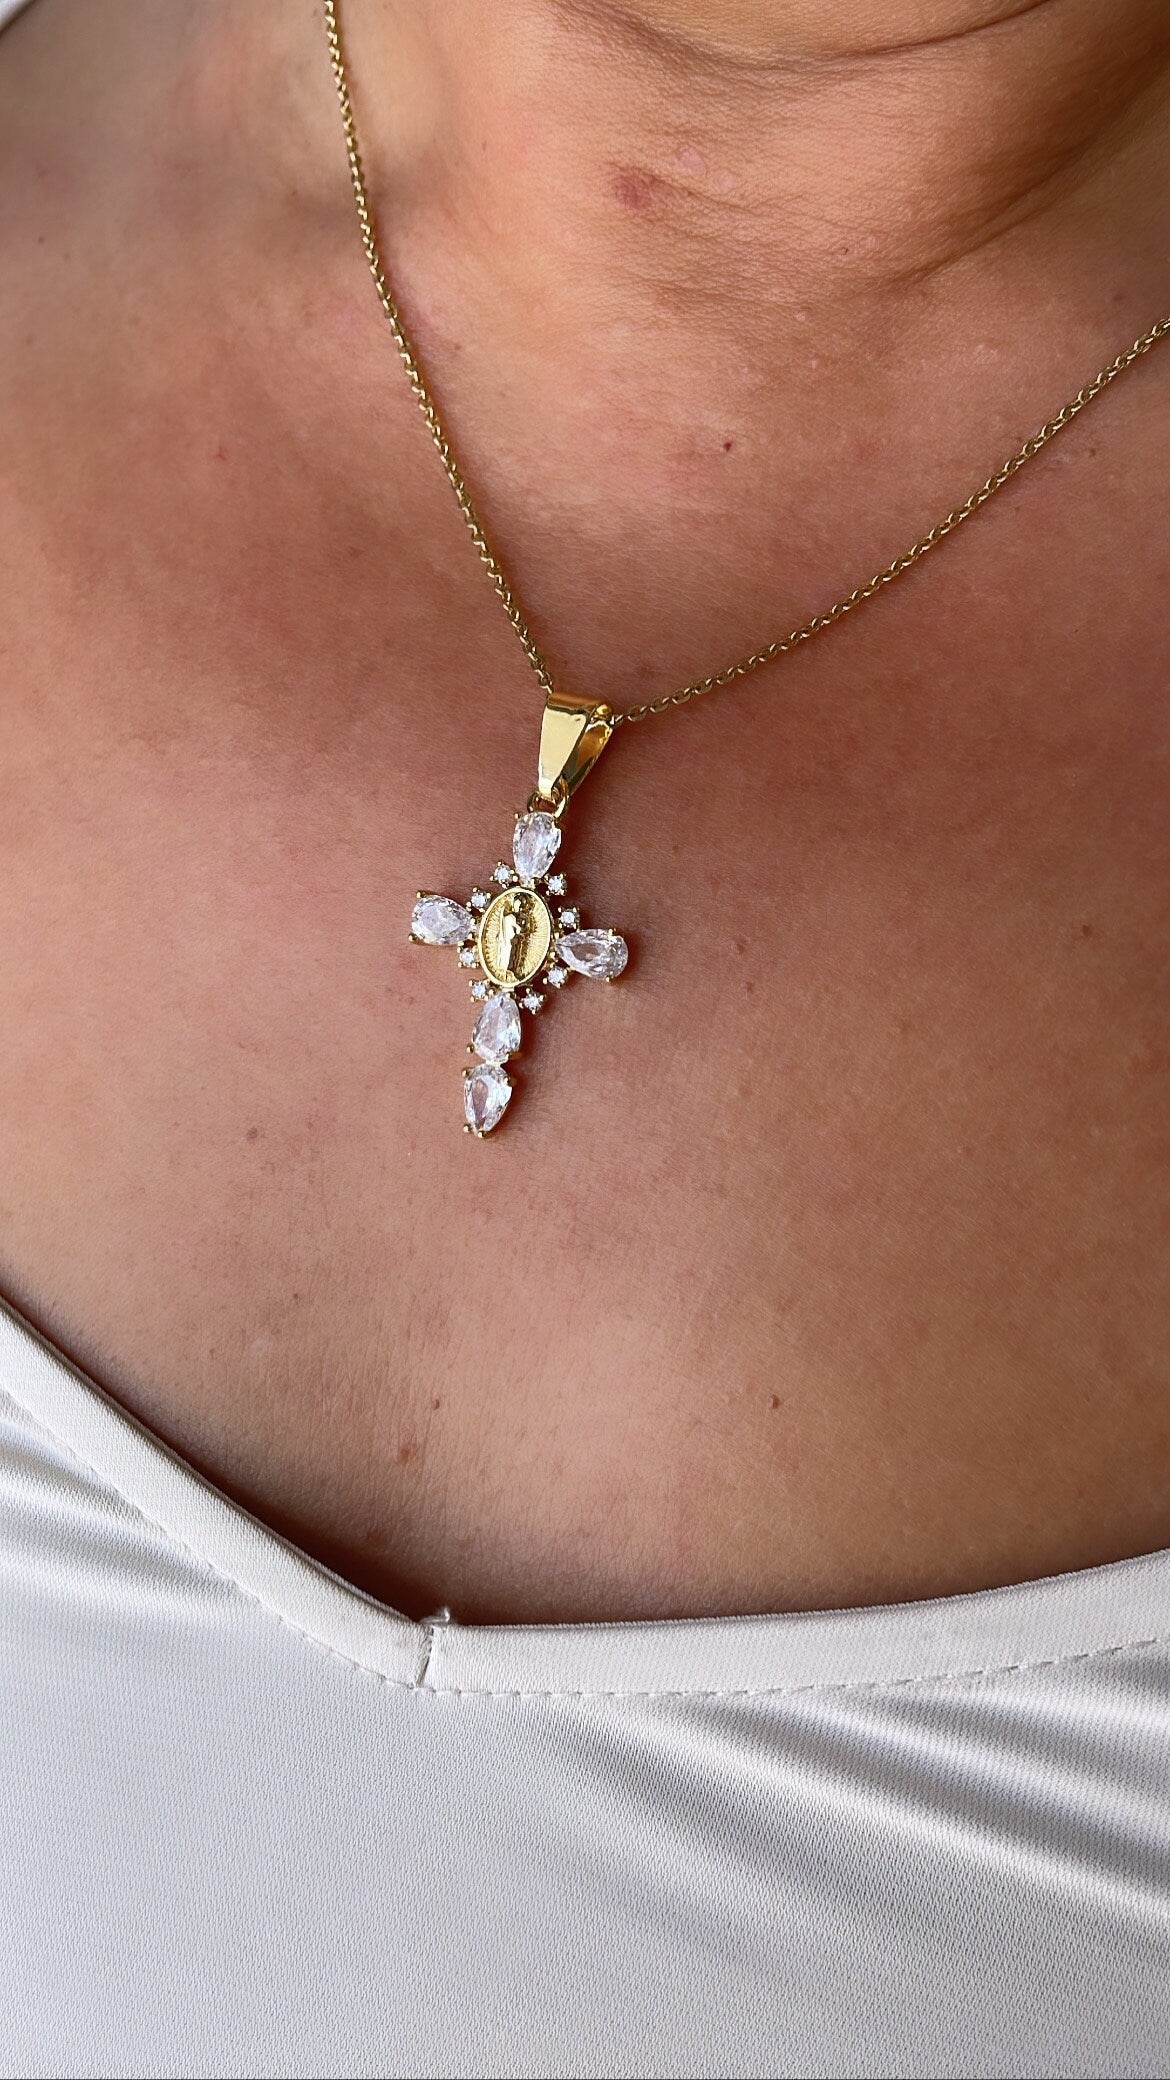 18k Gold Filled White Pear Cut Stone Crucifix With Jesus Center Pendant